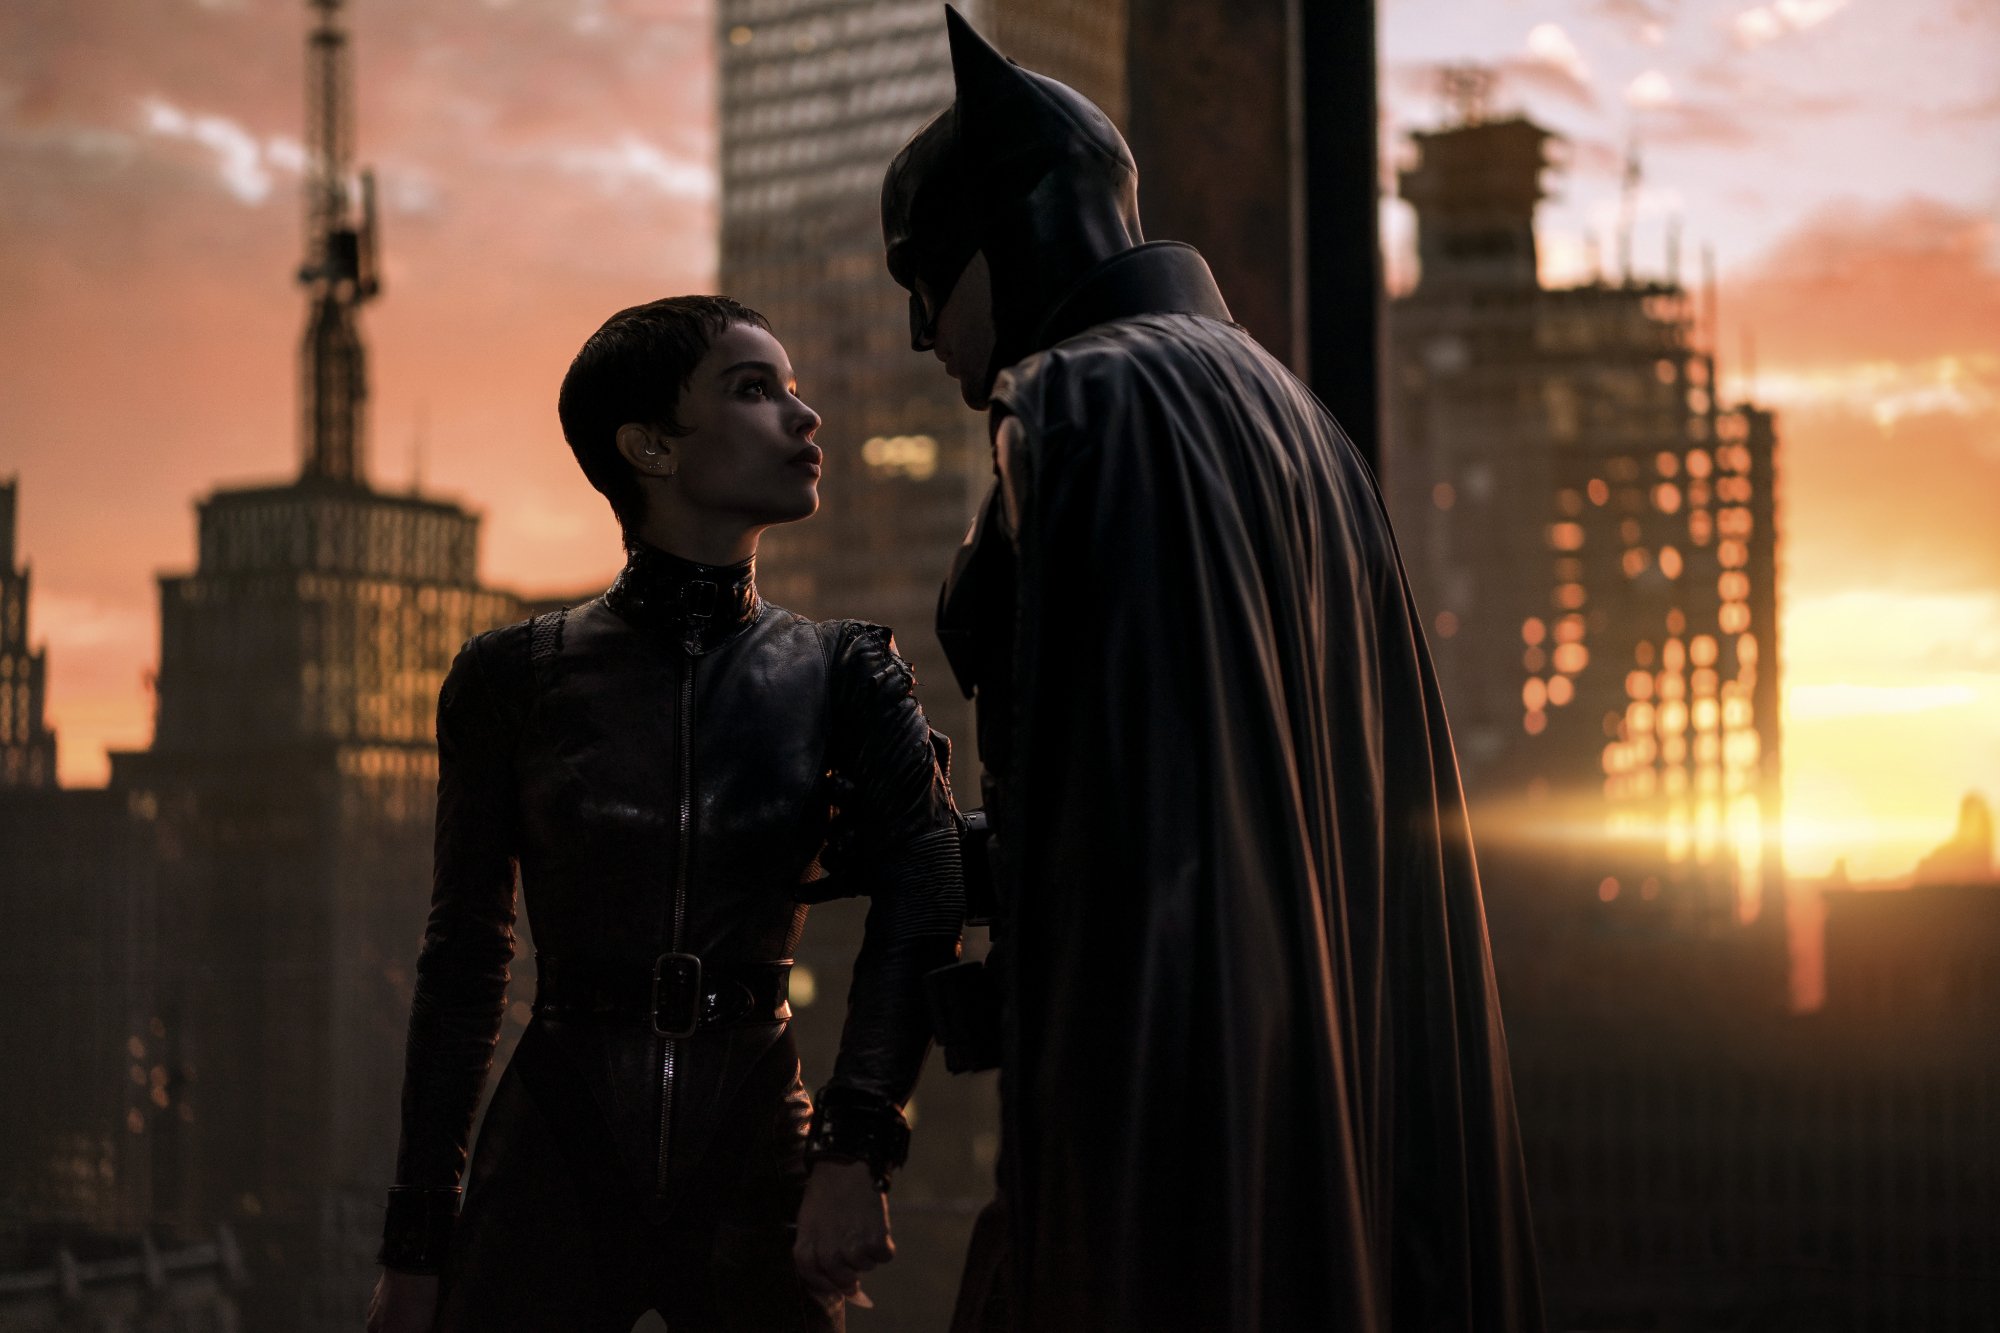 'The Batman' Zoë Kravitz as Selina Kyle_Catwoman and Robert Pattinson as Batman_Bruce Wayne looking at each other in front of a cityscape